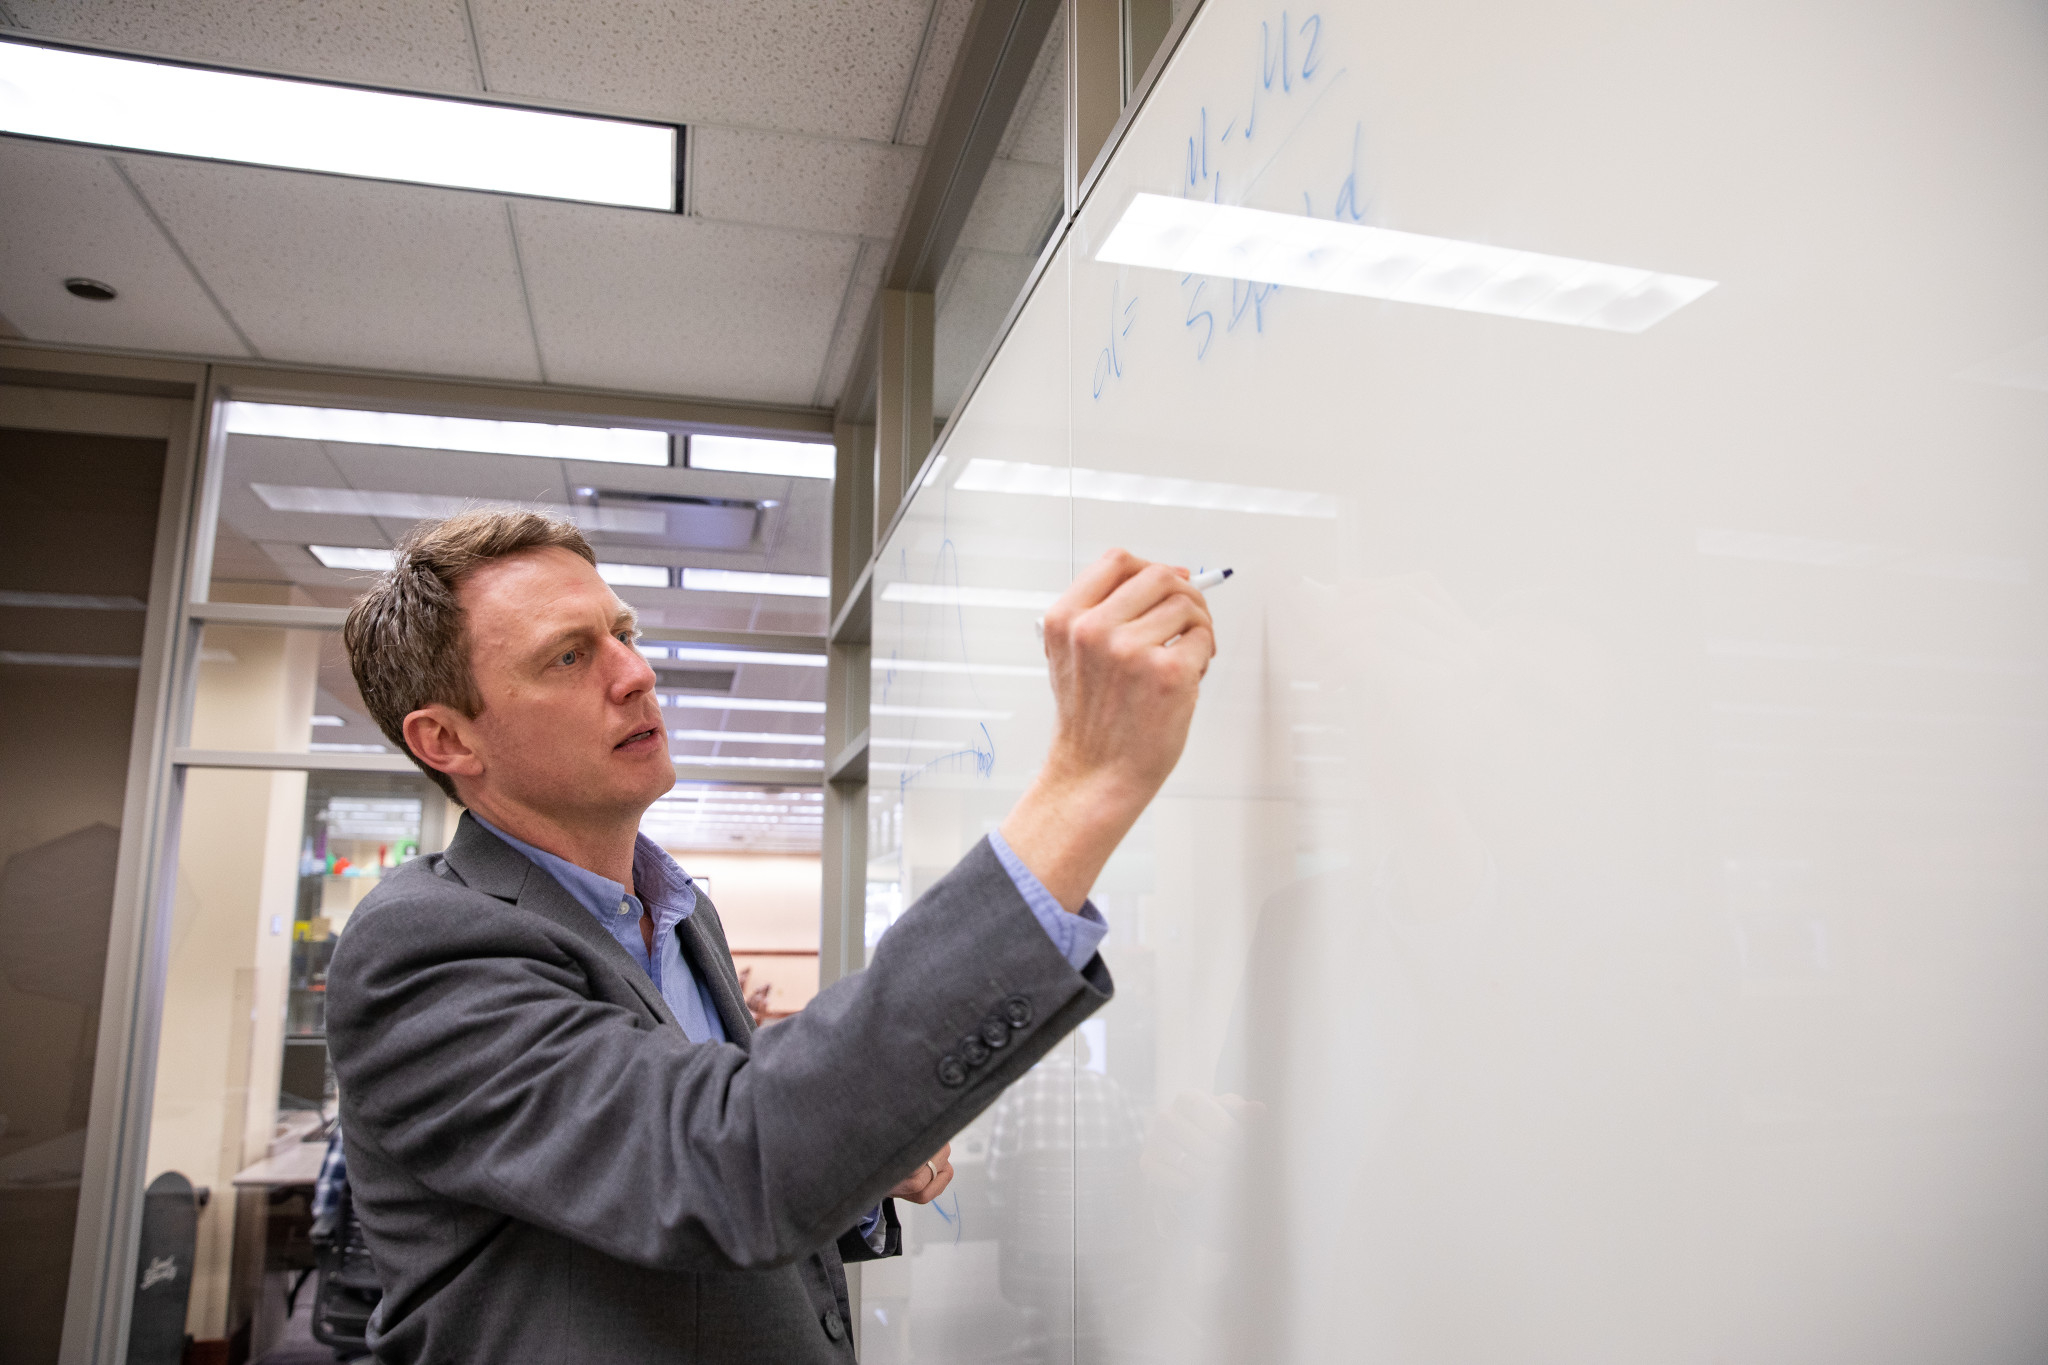 Faculty member writing on a white board